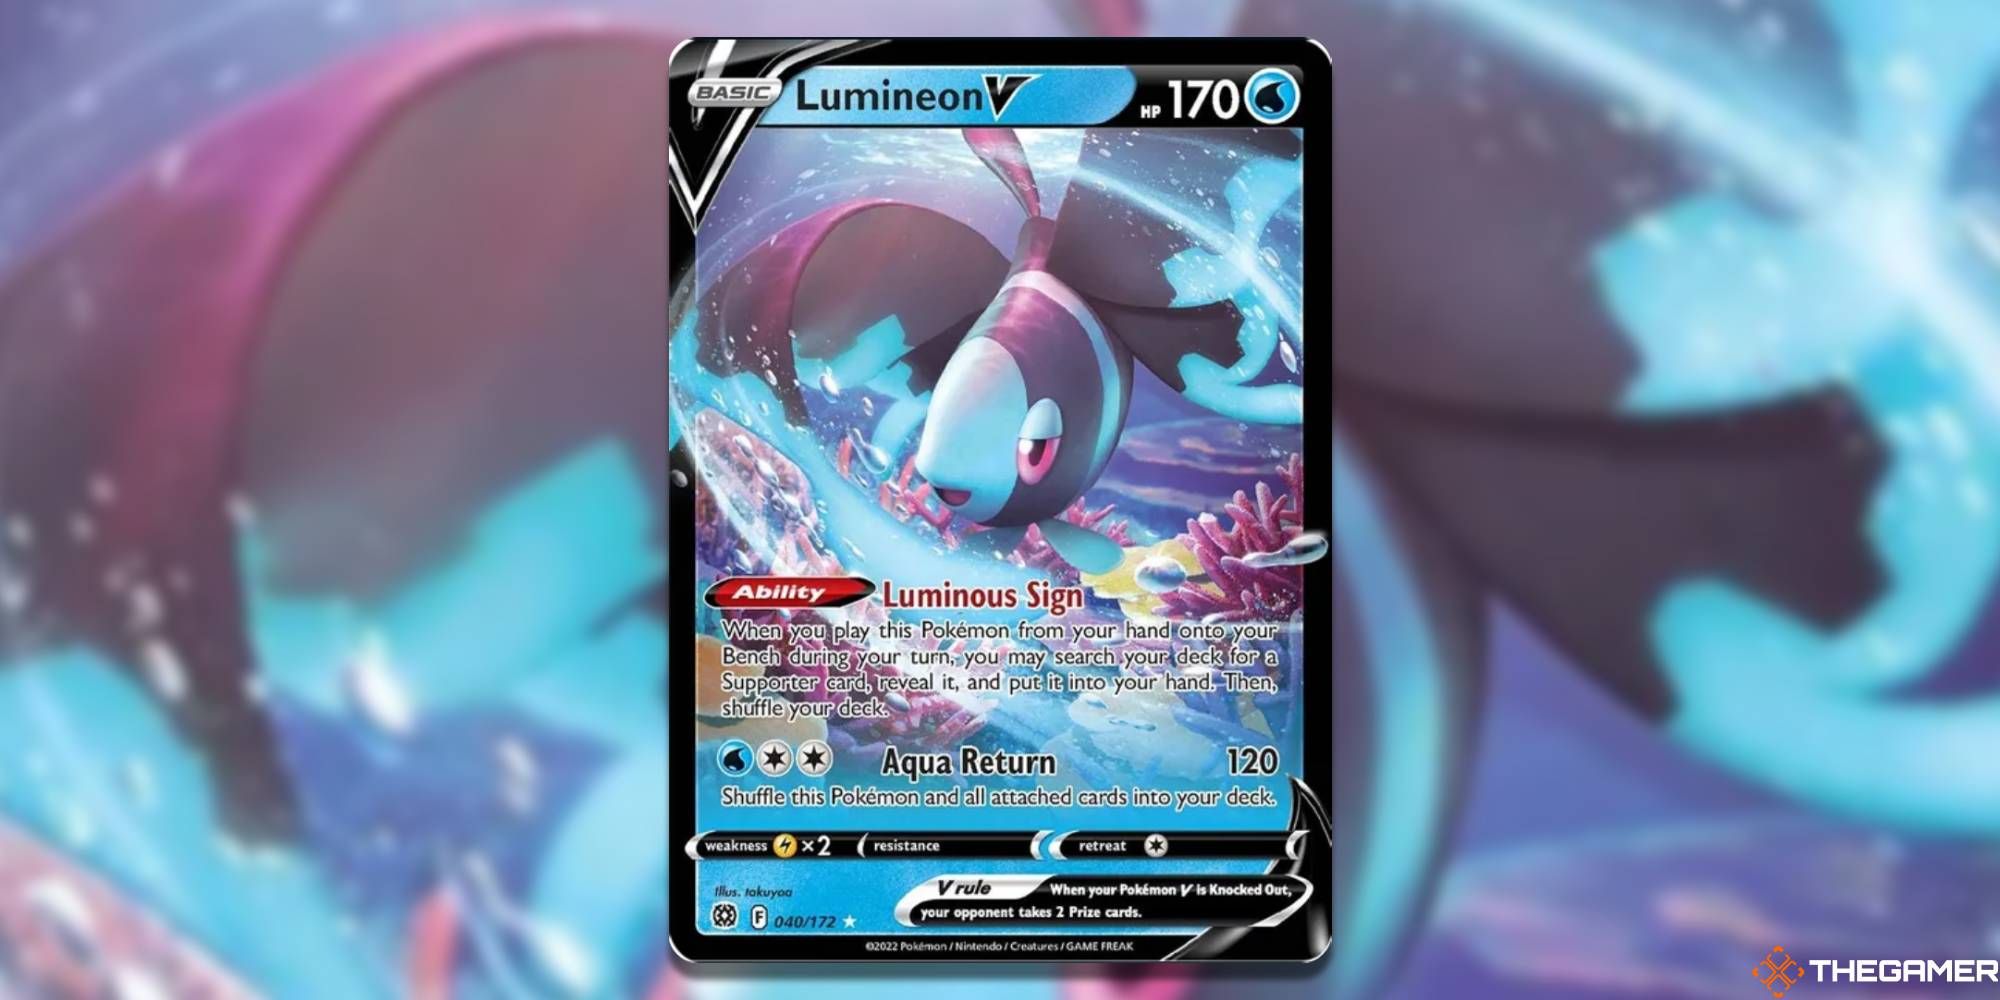 Lumineon V from Pokemon TCG with blurred background